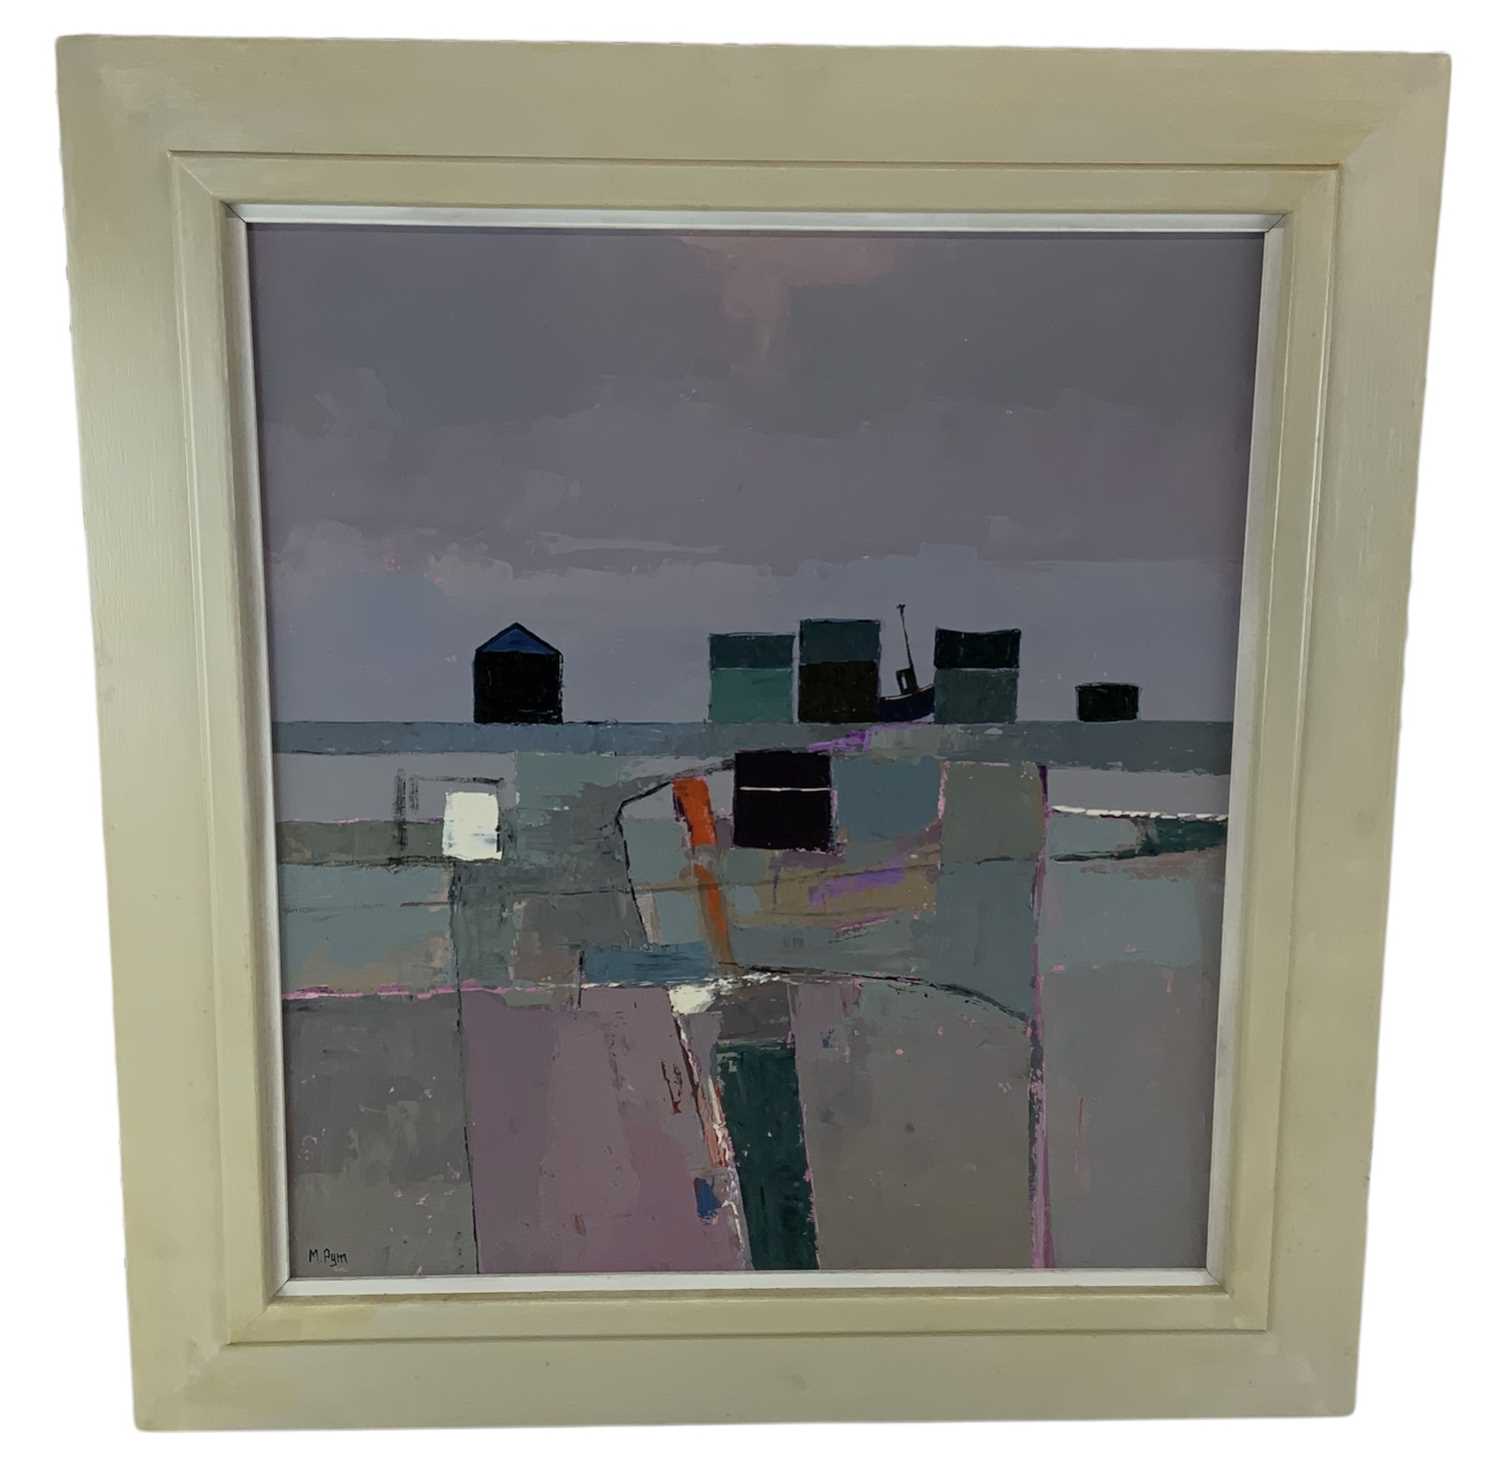 † MARY PYM (born 1935); oil on board, 'Dungeness Sheds on Picnic Ground', signed lower left, 52.5